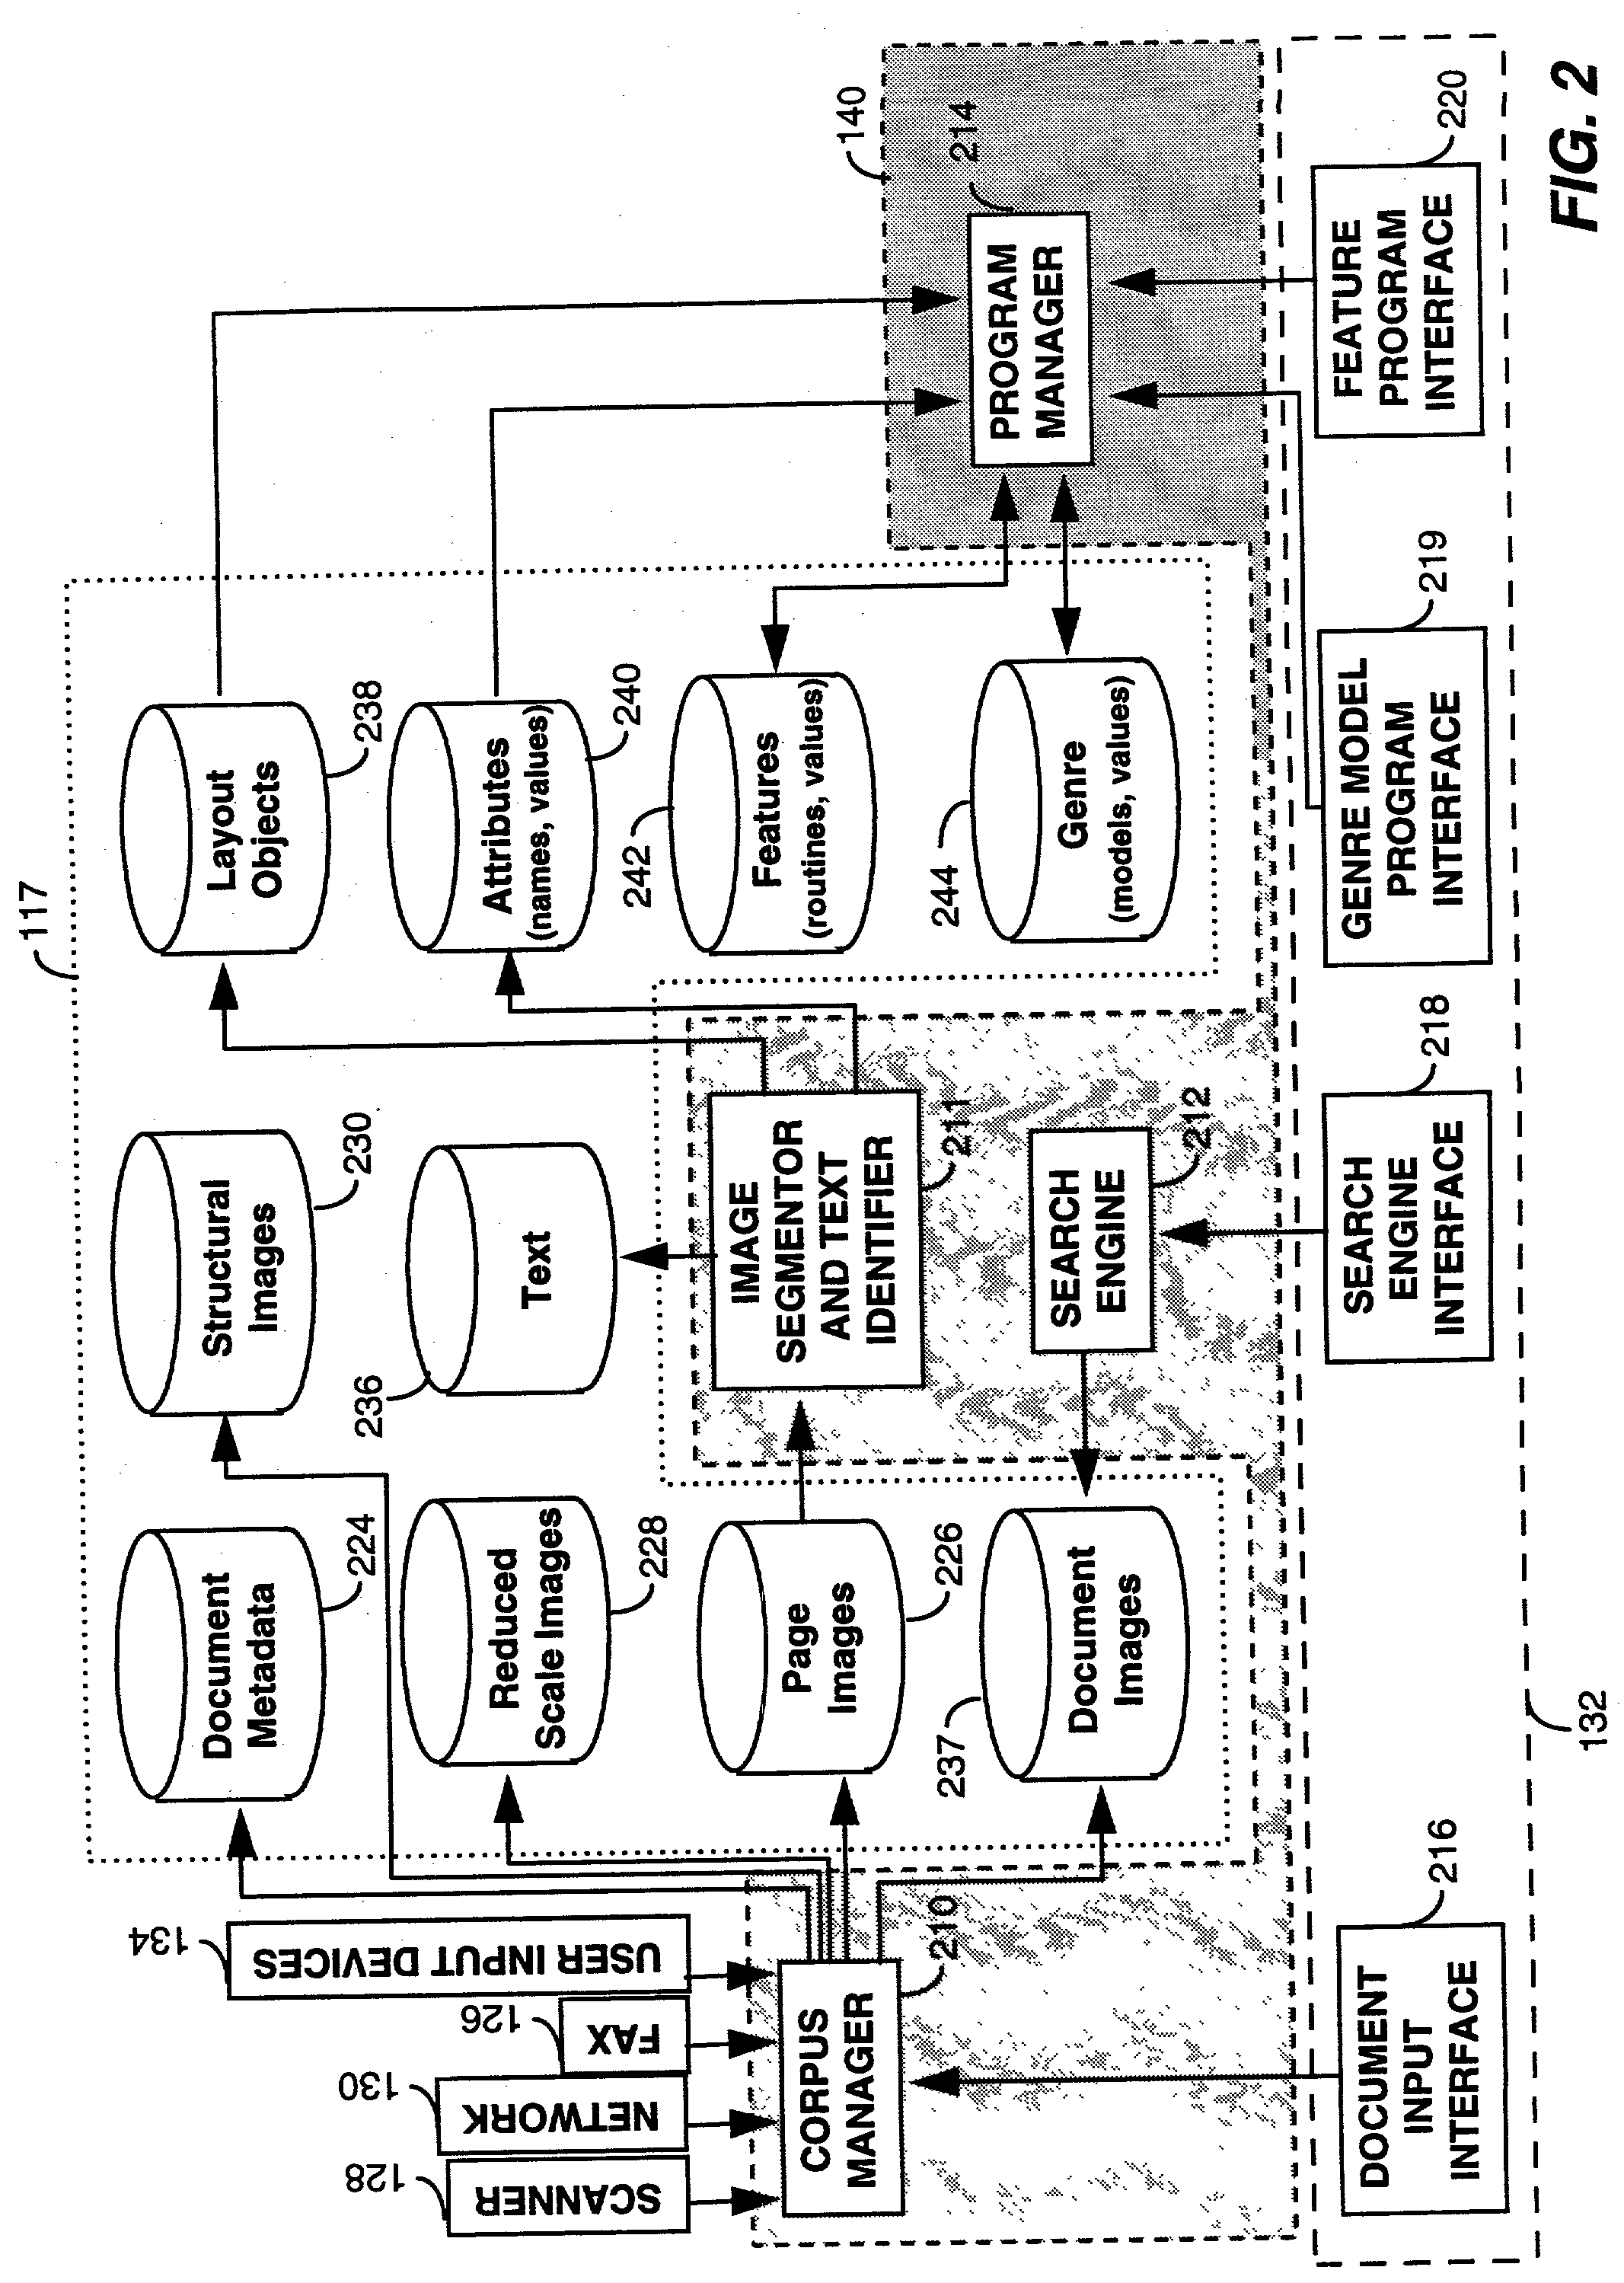 System for sorting document images by shape comparisons among corresponding layout components